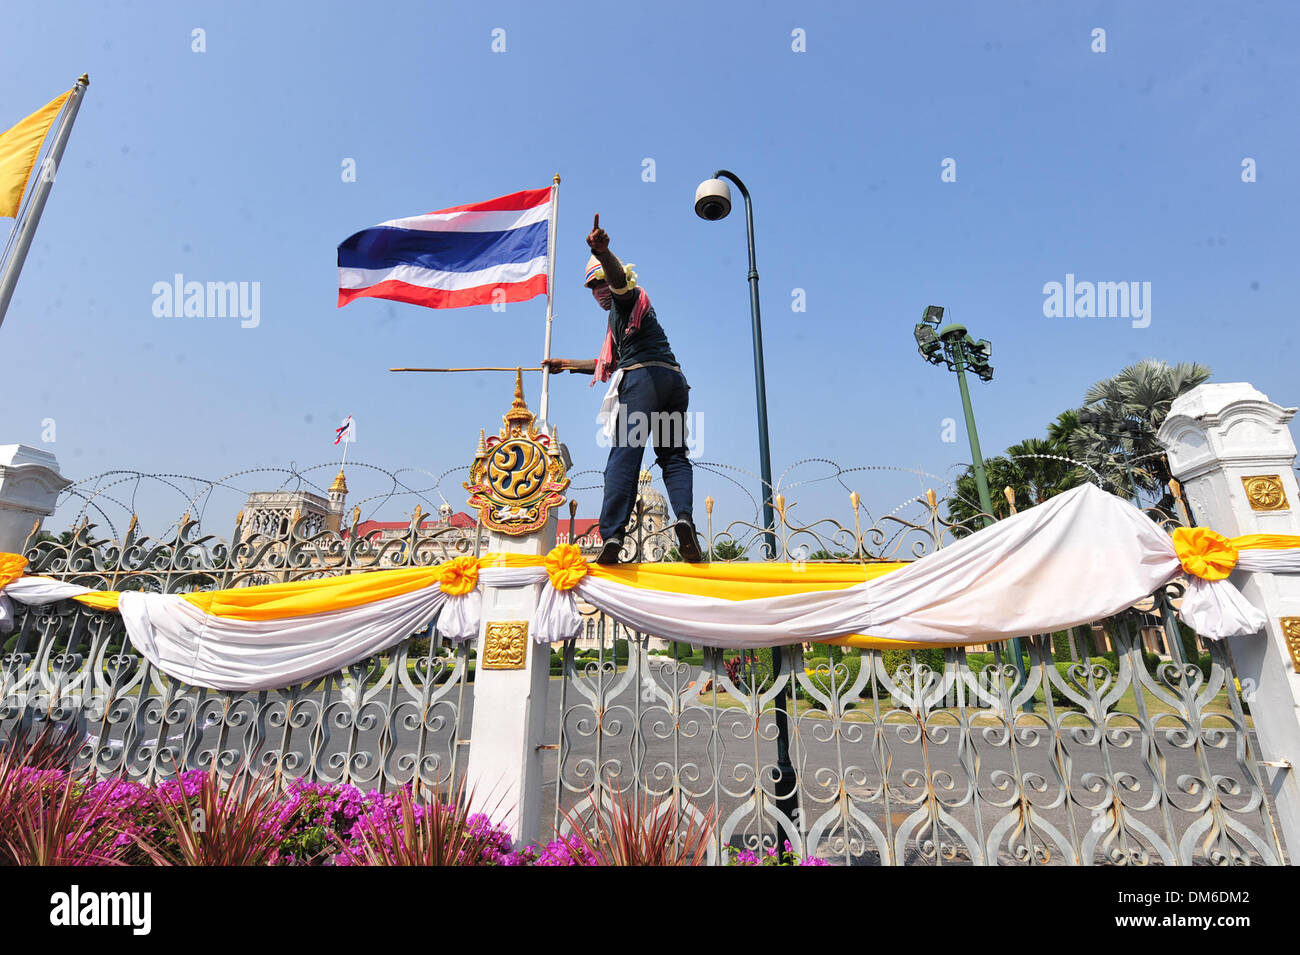 Bangkok, Thailand. 12th Dec, 2013. A Thai anti-government protestor climbs into the courtyard of Government House in Bangkok, Thailand, Dec. 12, 2013. Thai caretaker Prime Minister Yingluck Shinawatra on Thursday invited all political parties and sectors of the society to meet on Sunday to seek solutions to the political deadlock. Credit: Rachen Sageamsak/Xinhua/Alamy Live News Stock Photo